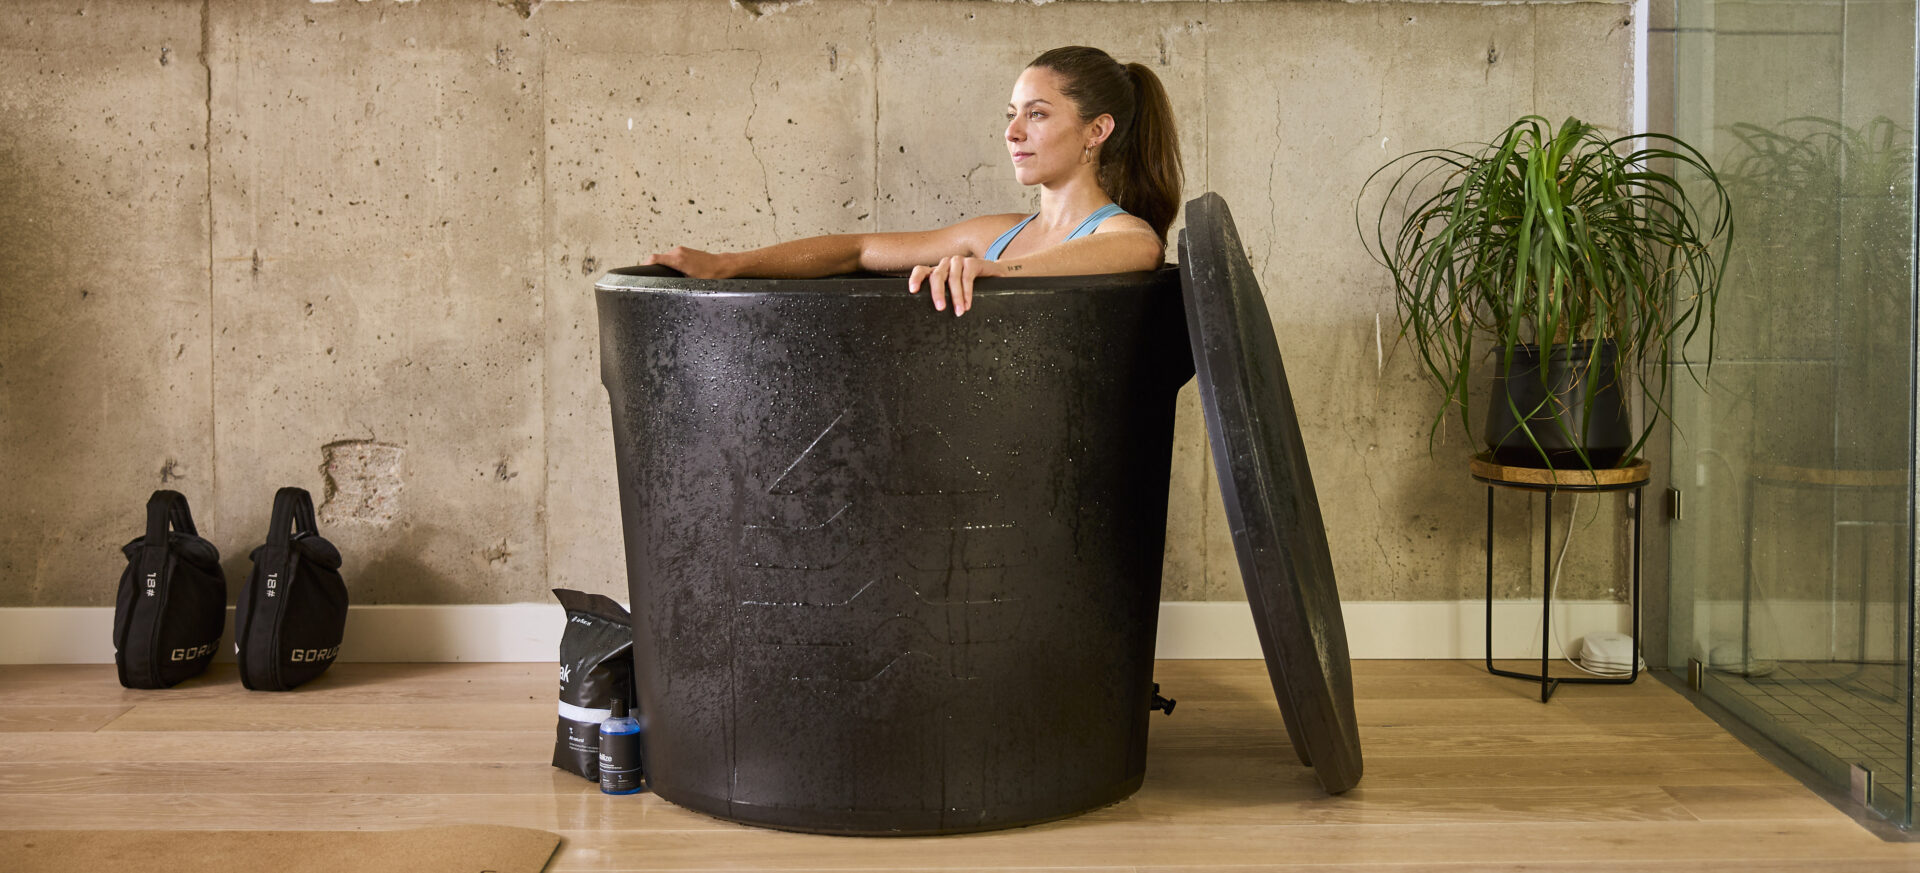 Woman relaxing while taking an ice bath in an Ice Barrel